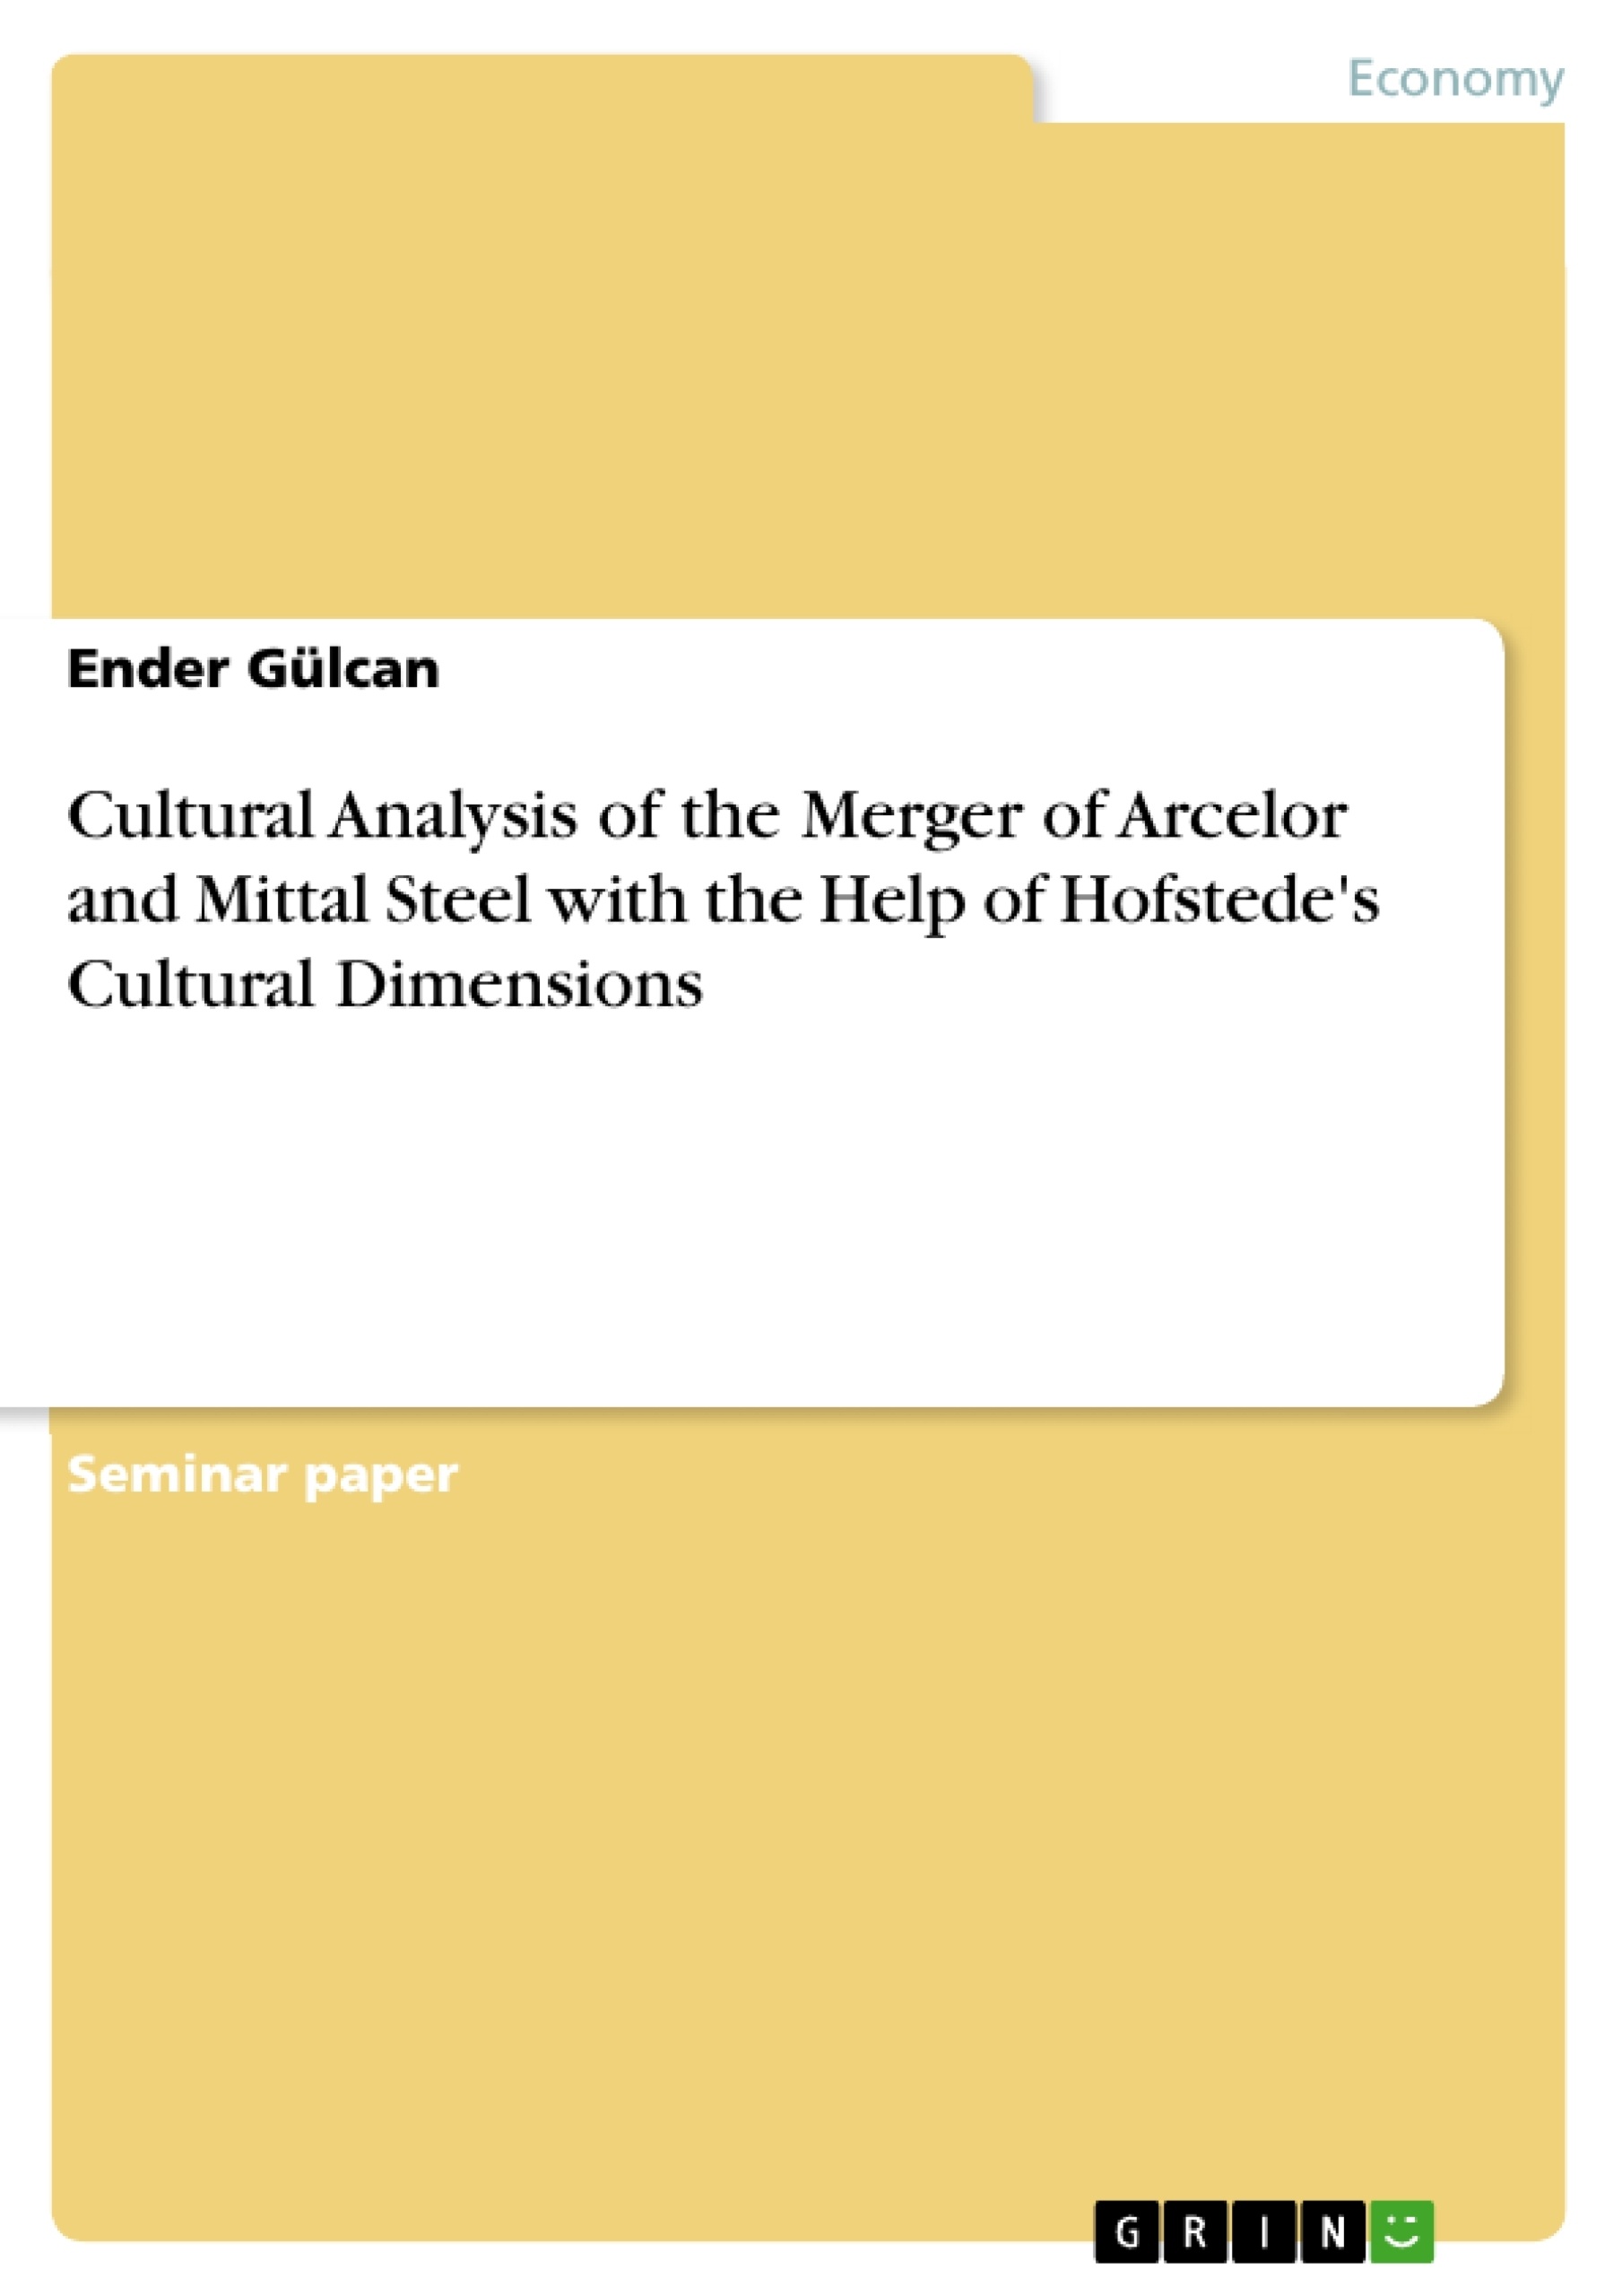 Title: Cultural Analysis of the Merger of Arcelor and Mittal Steel with the Help of Hofstede's Cultural Dimensions